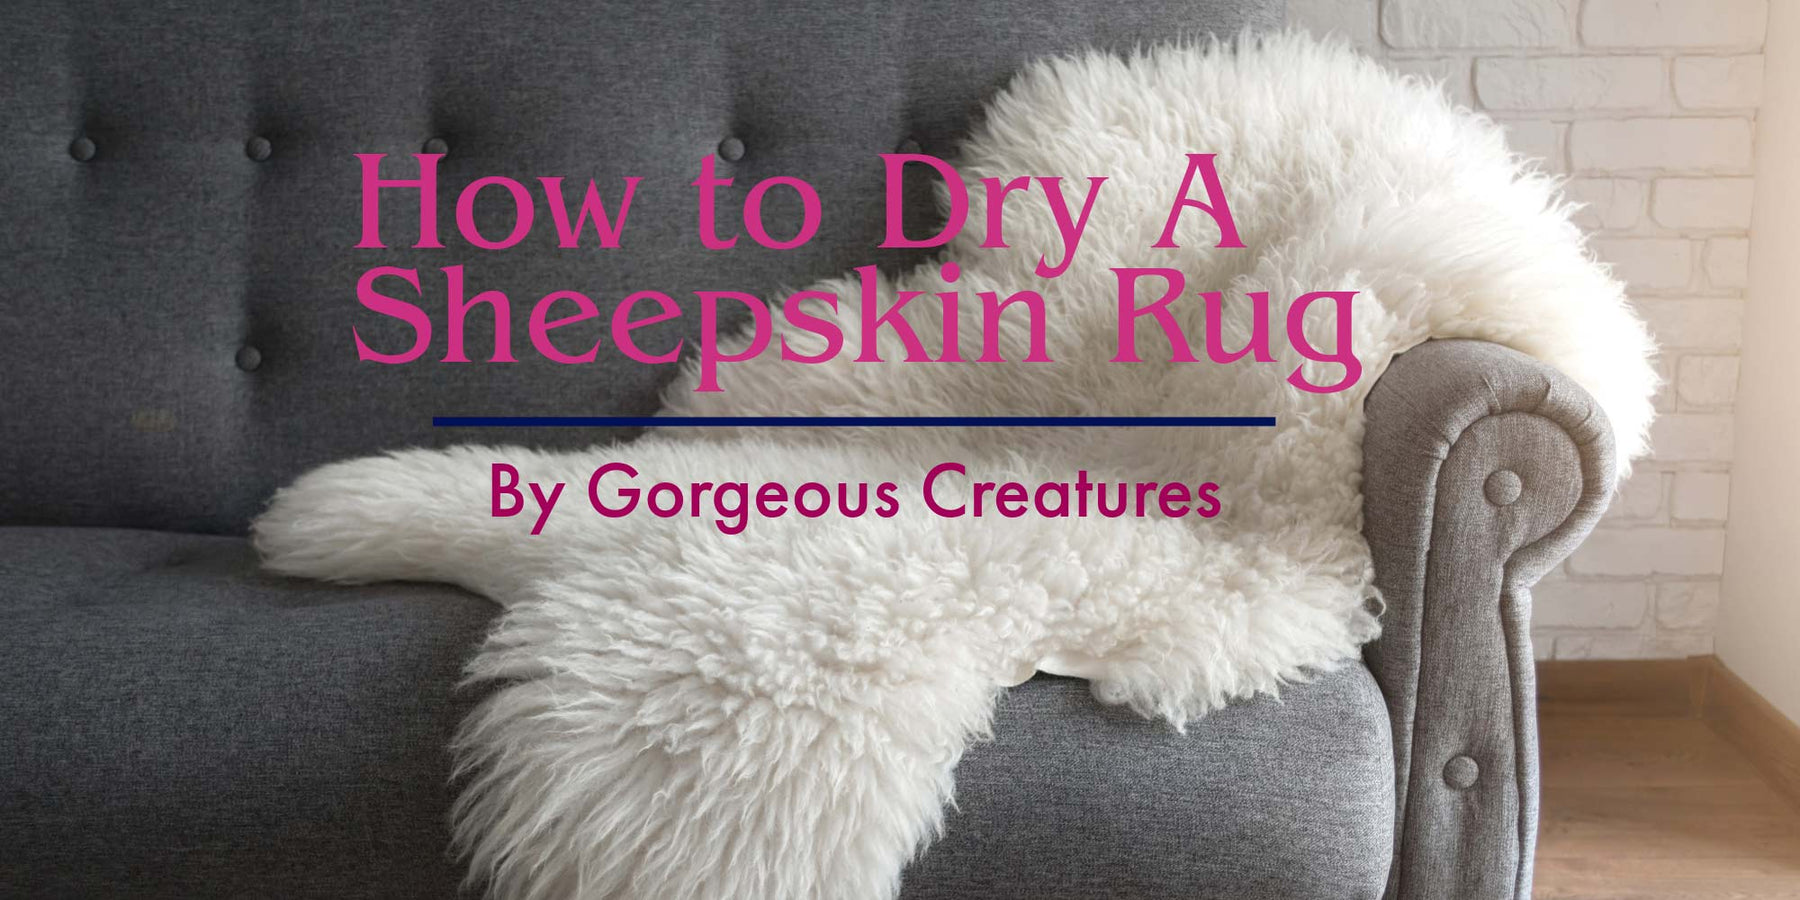 How to Dry a Sheepskin Rug by Gorgeous Creatures